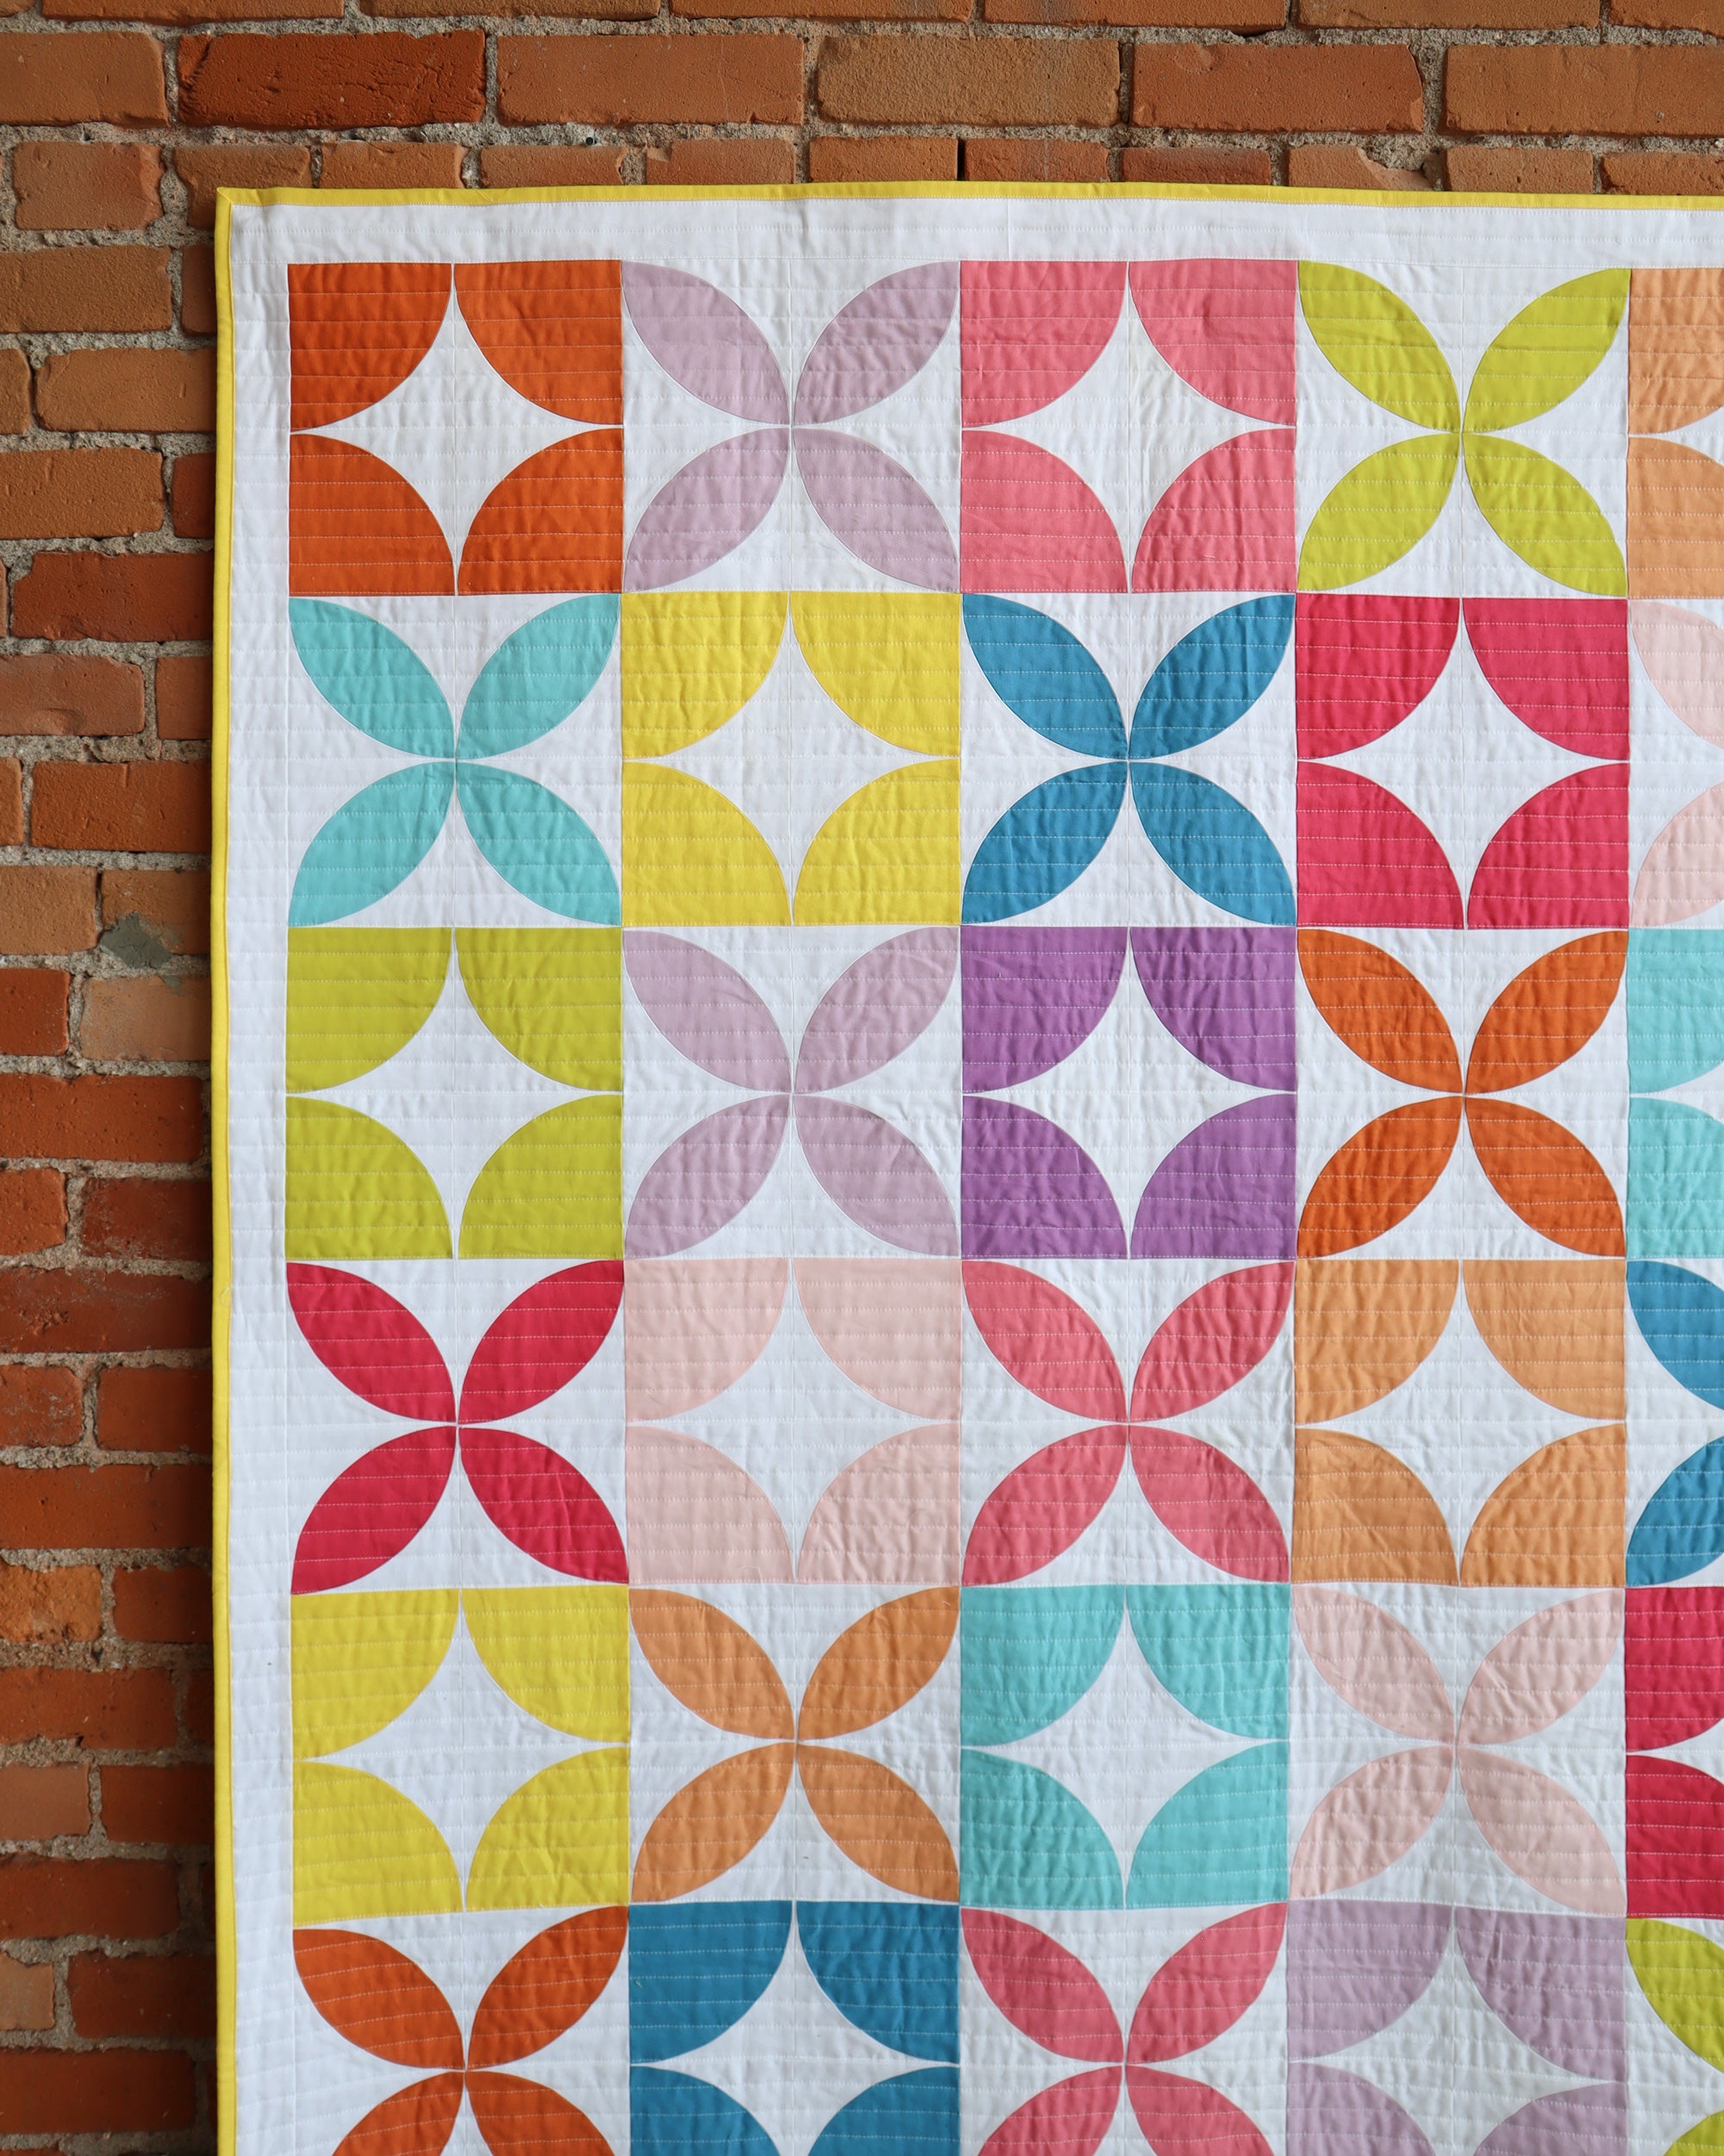 Mod Dreams - A modern quilt pattern perfect for quilters trying curved piecing for the first time or curve enthusiasts!